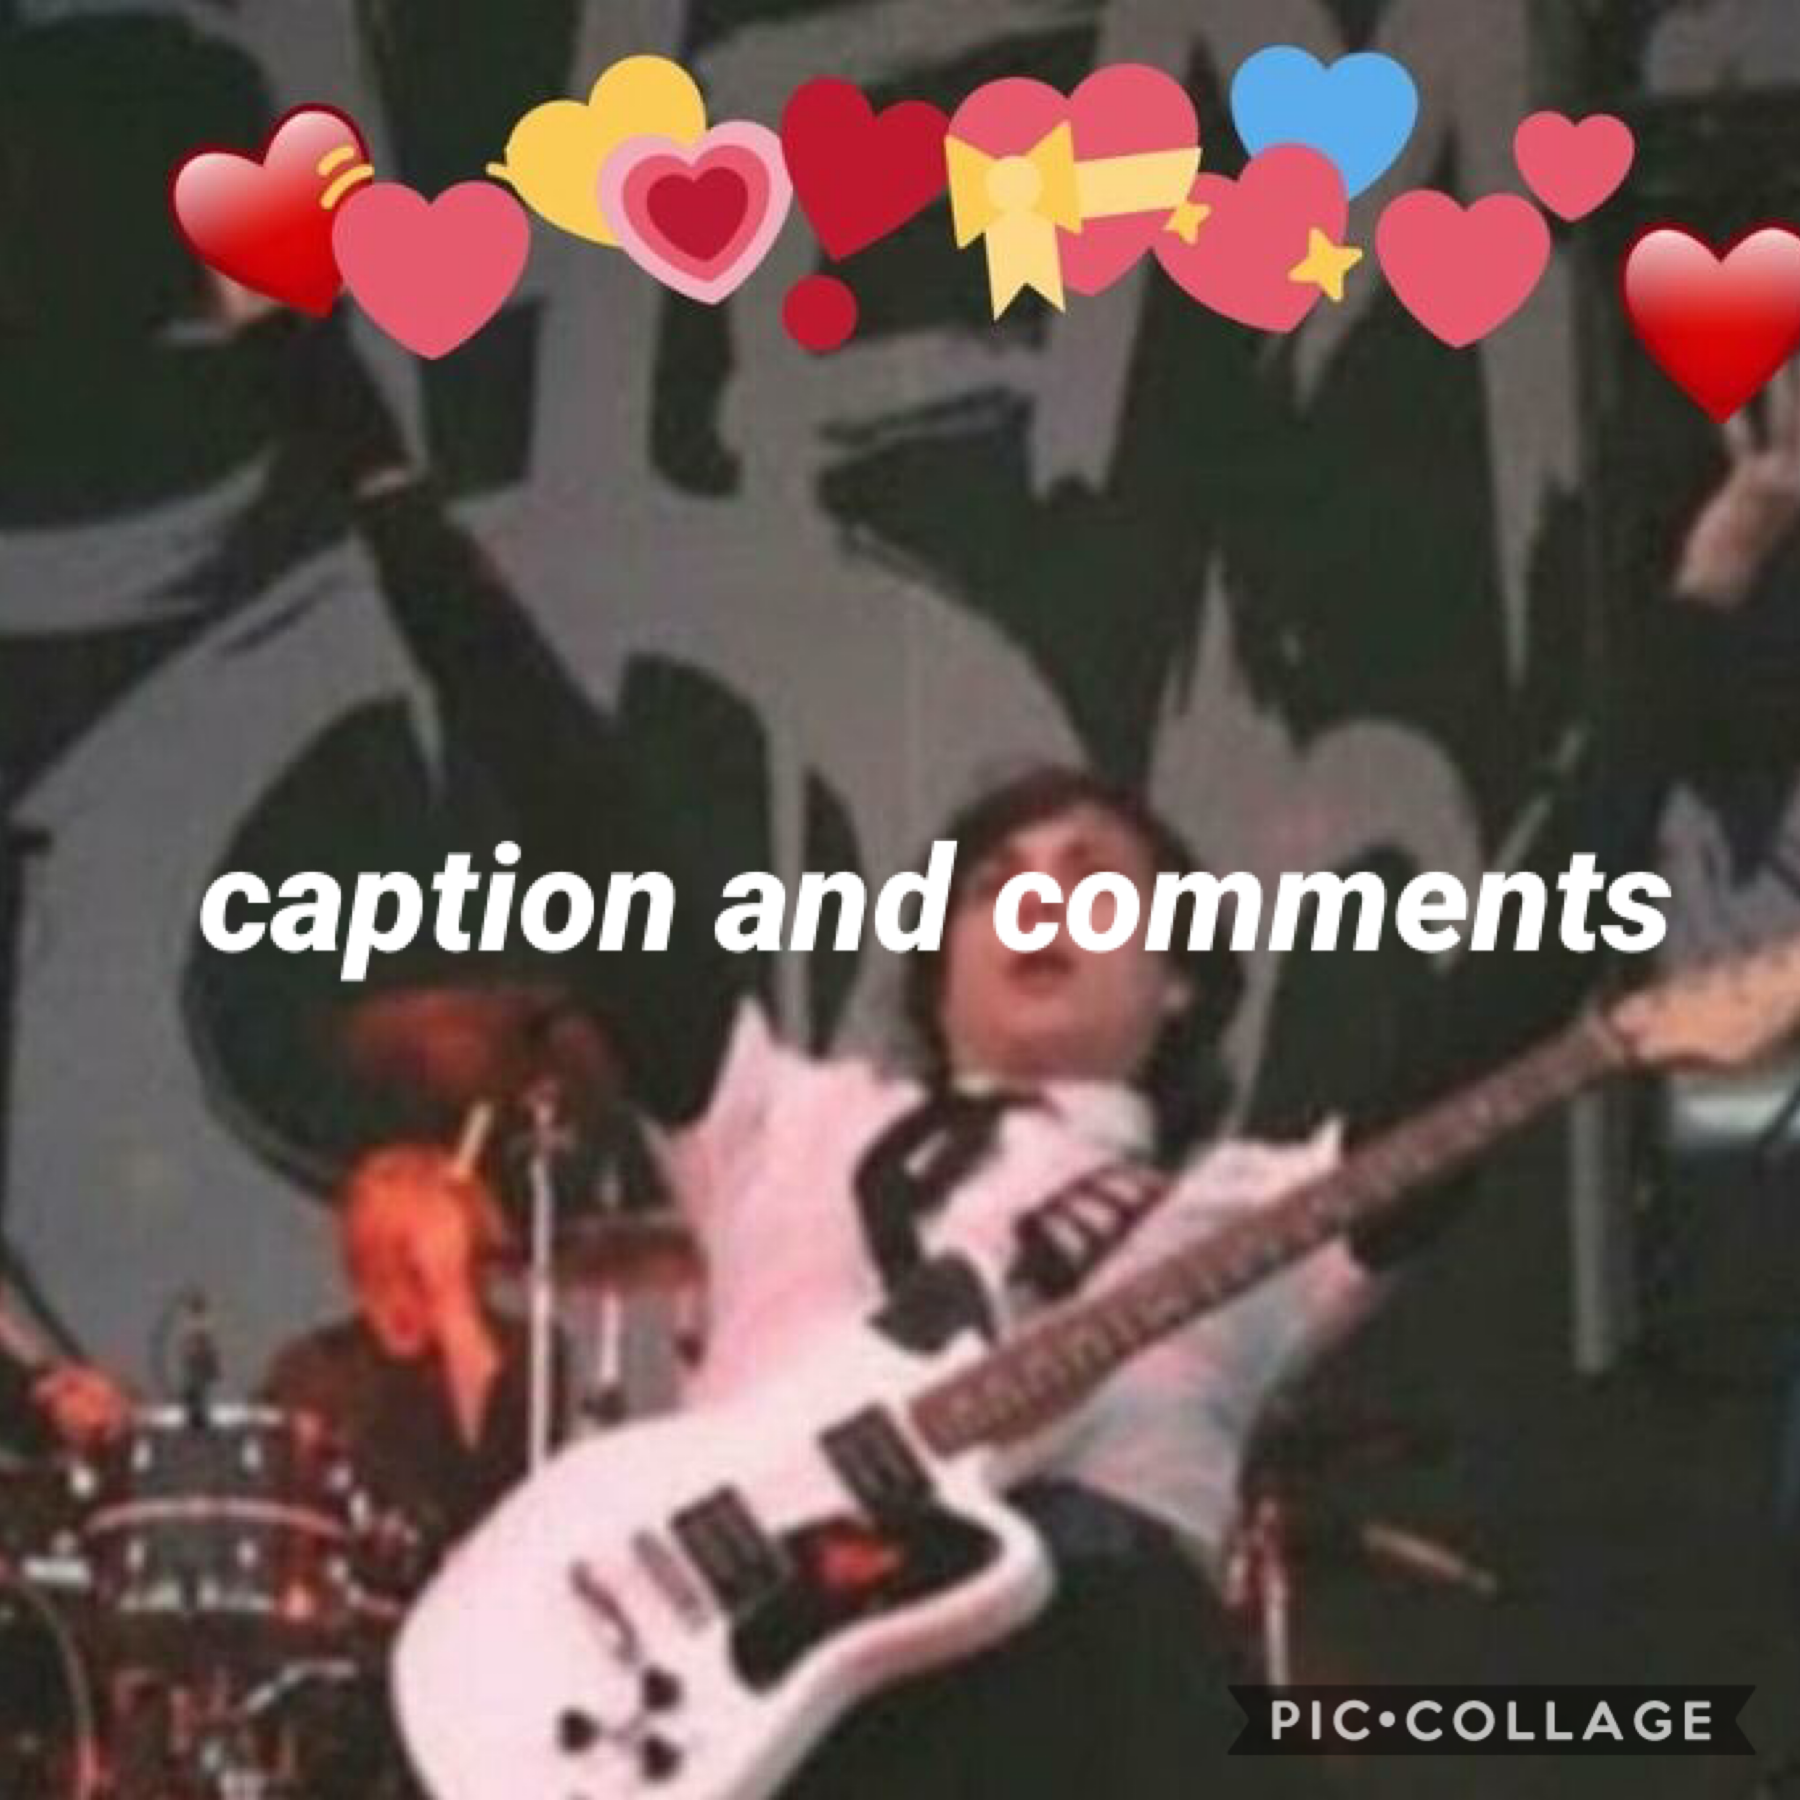 hii, i have a little announcement about this account. as you can tell, i haven’t been posting any collages anymore and have been inactive. this is because i honestly have no time to make edits anymore. school is going pretty good right now, but it’s A LOT